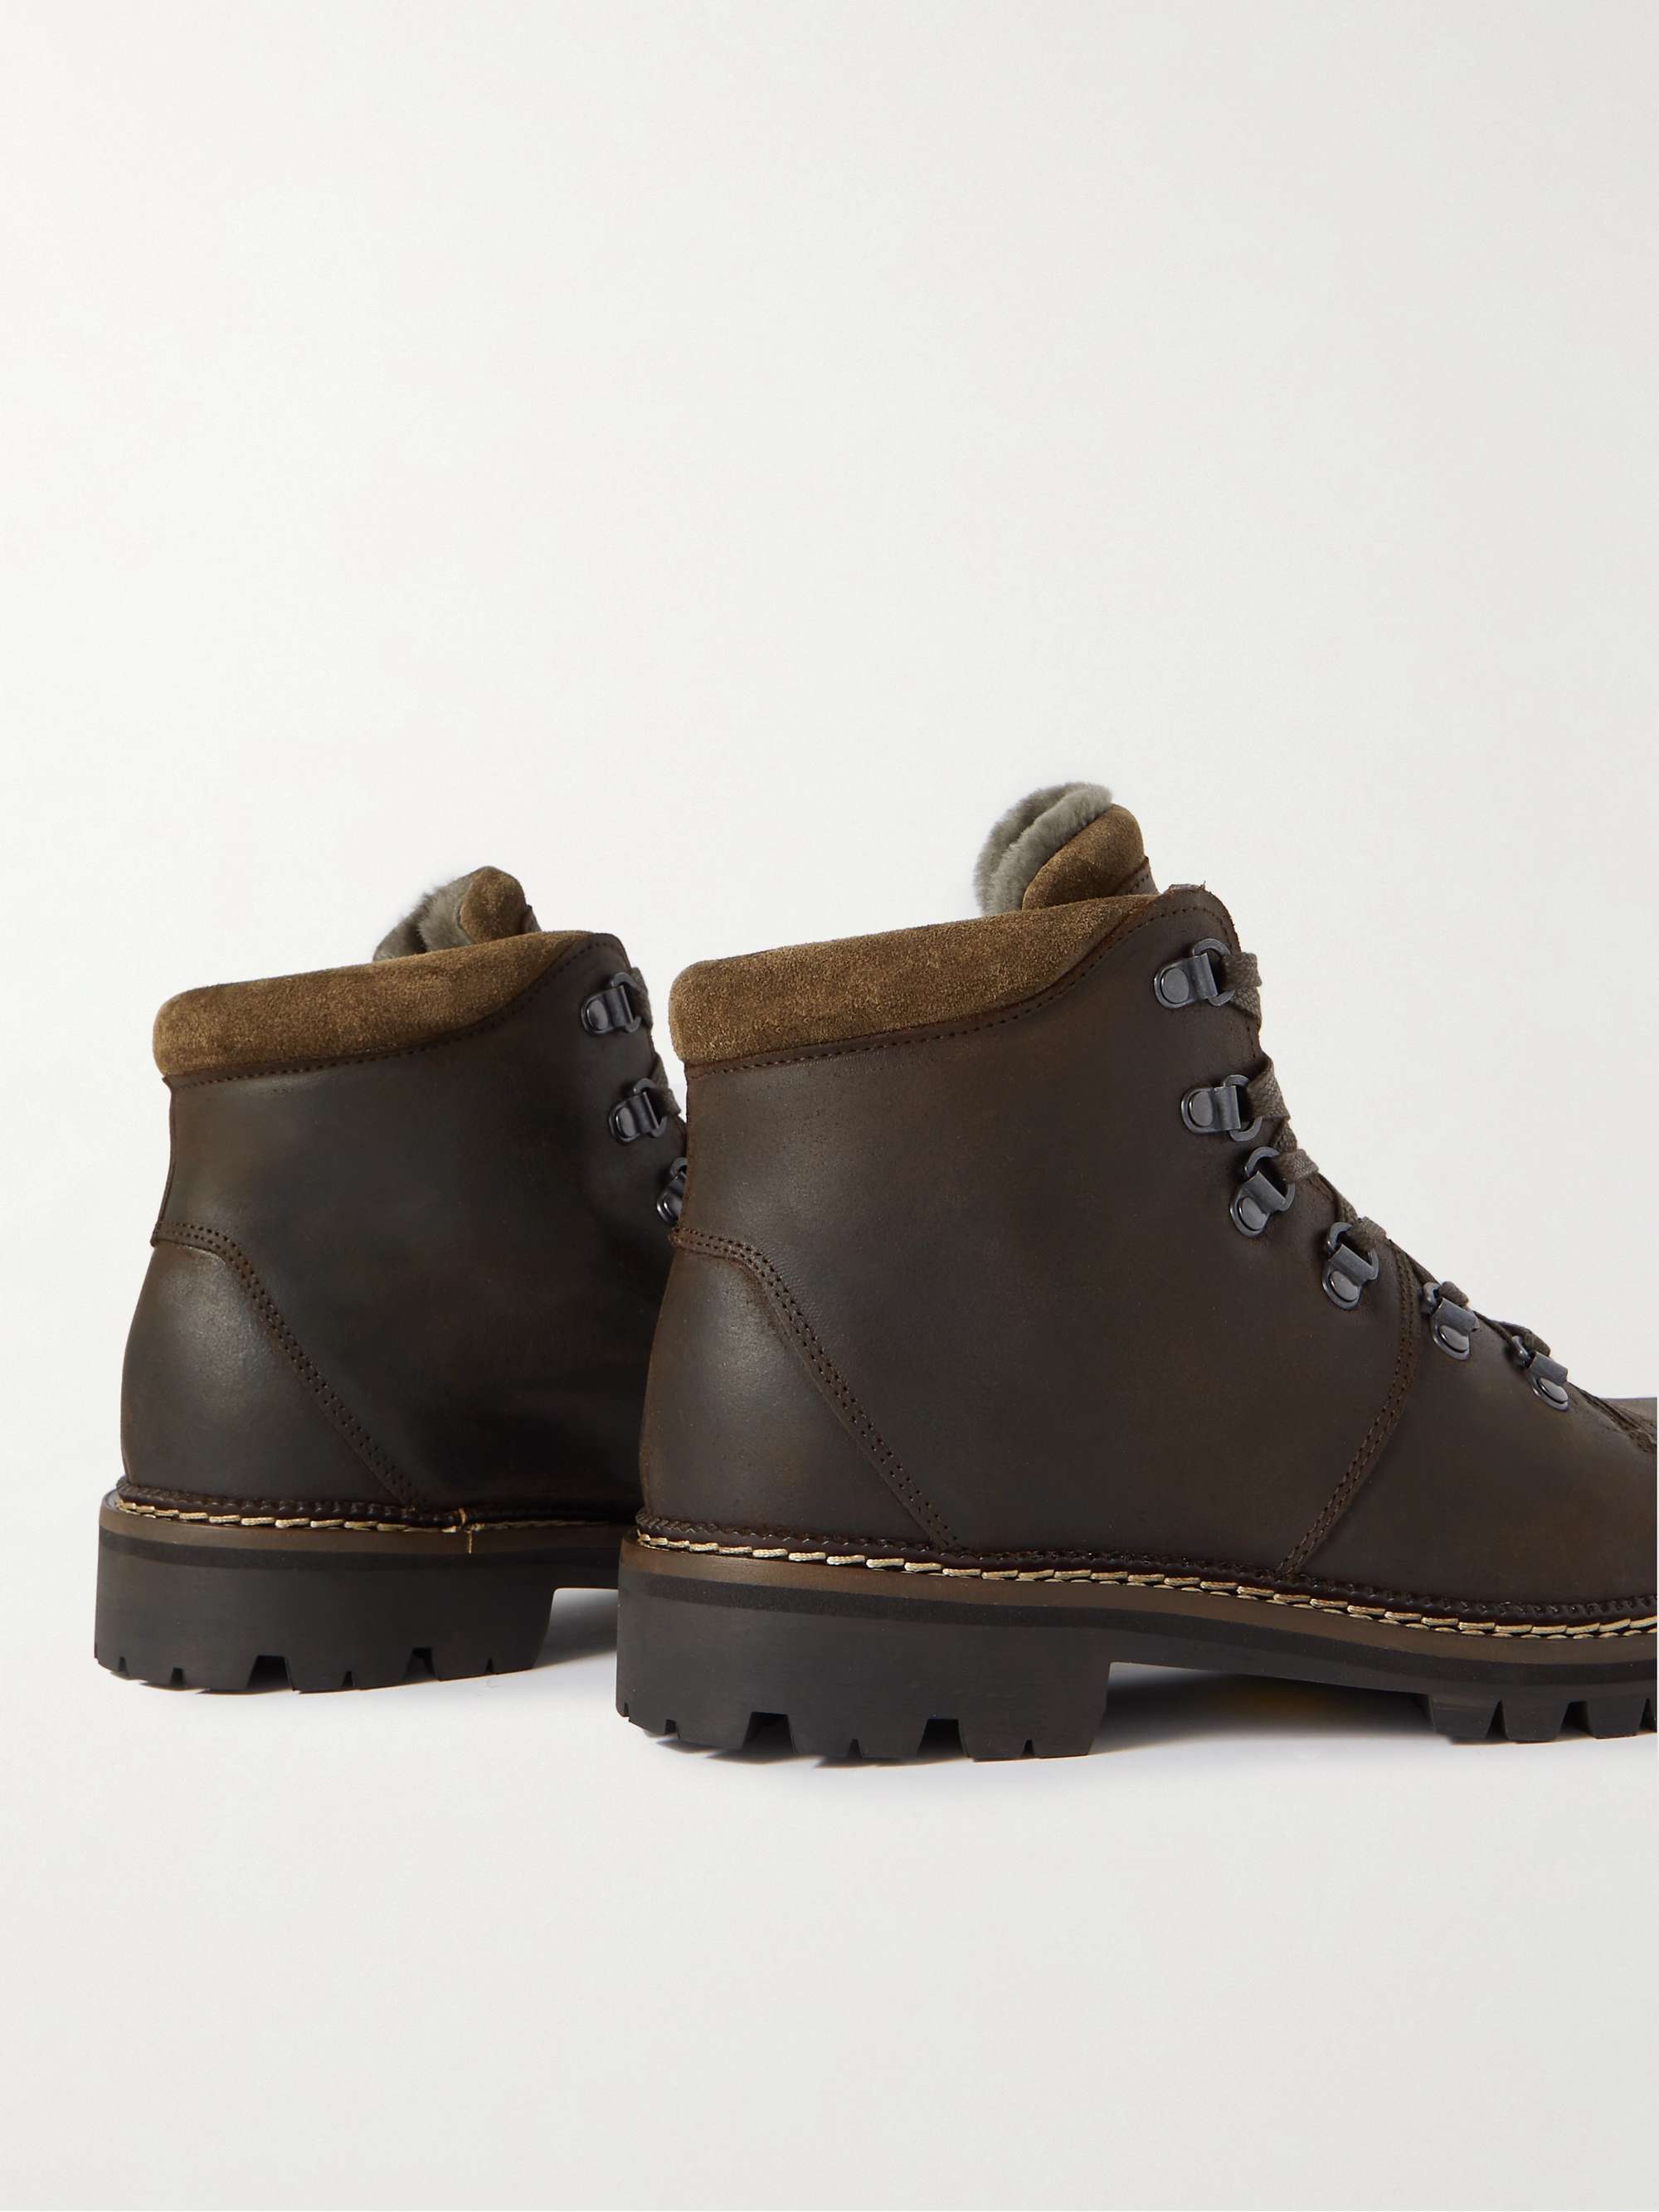 MR P. Jacques Suede-Trimmed Leather Boots